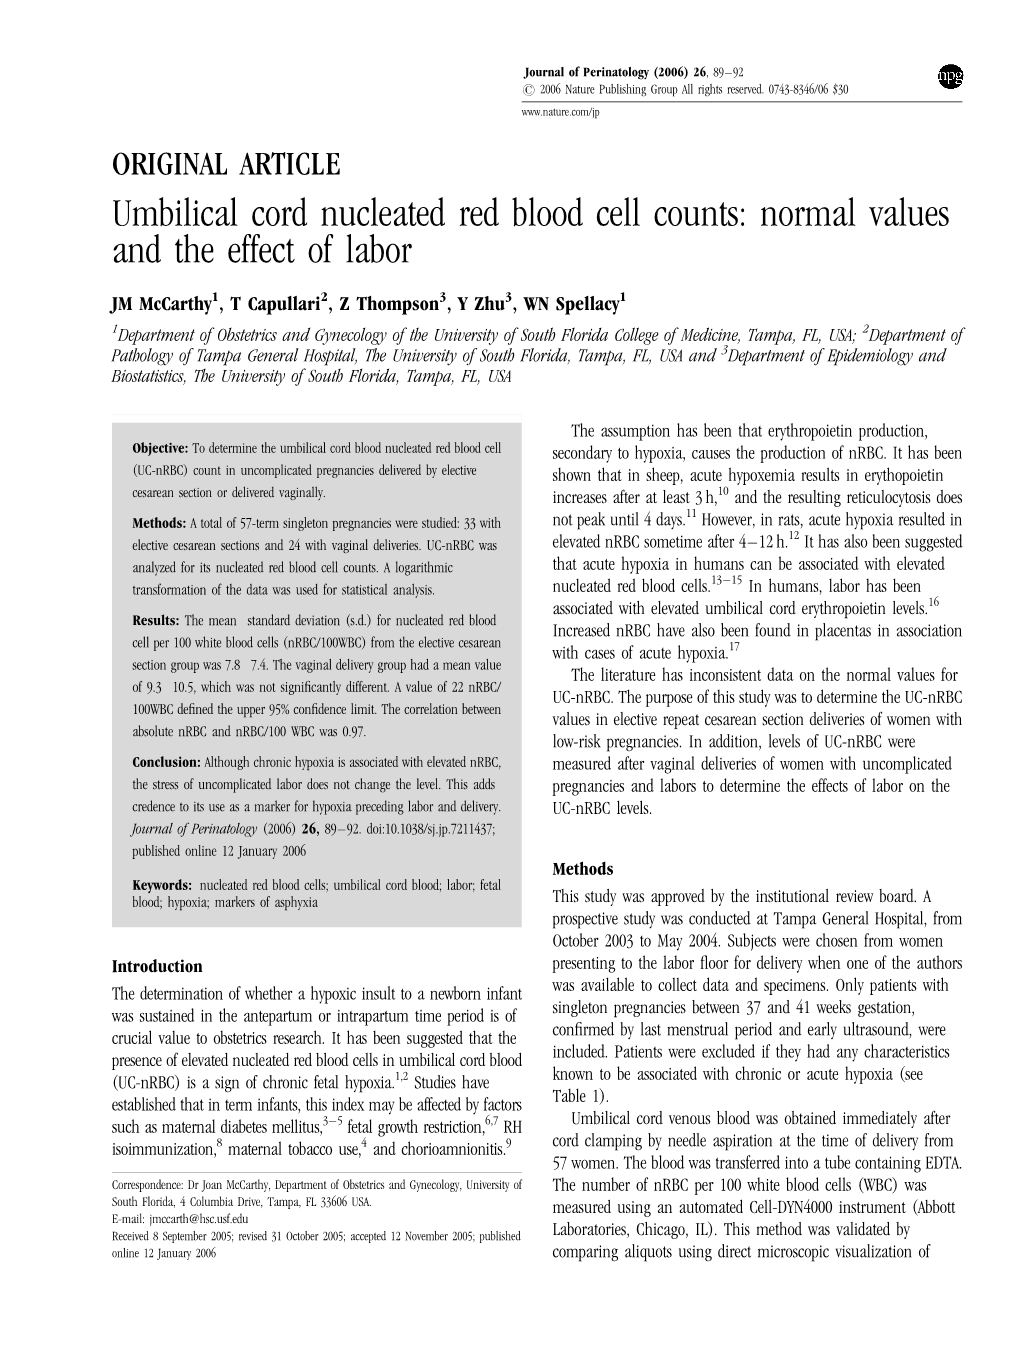 Umbilical Cord Nucleated Red Blood Cell Counts: Normal Values and the Effect of Labor